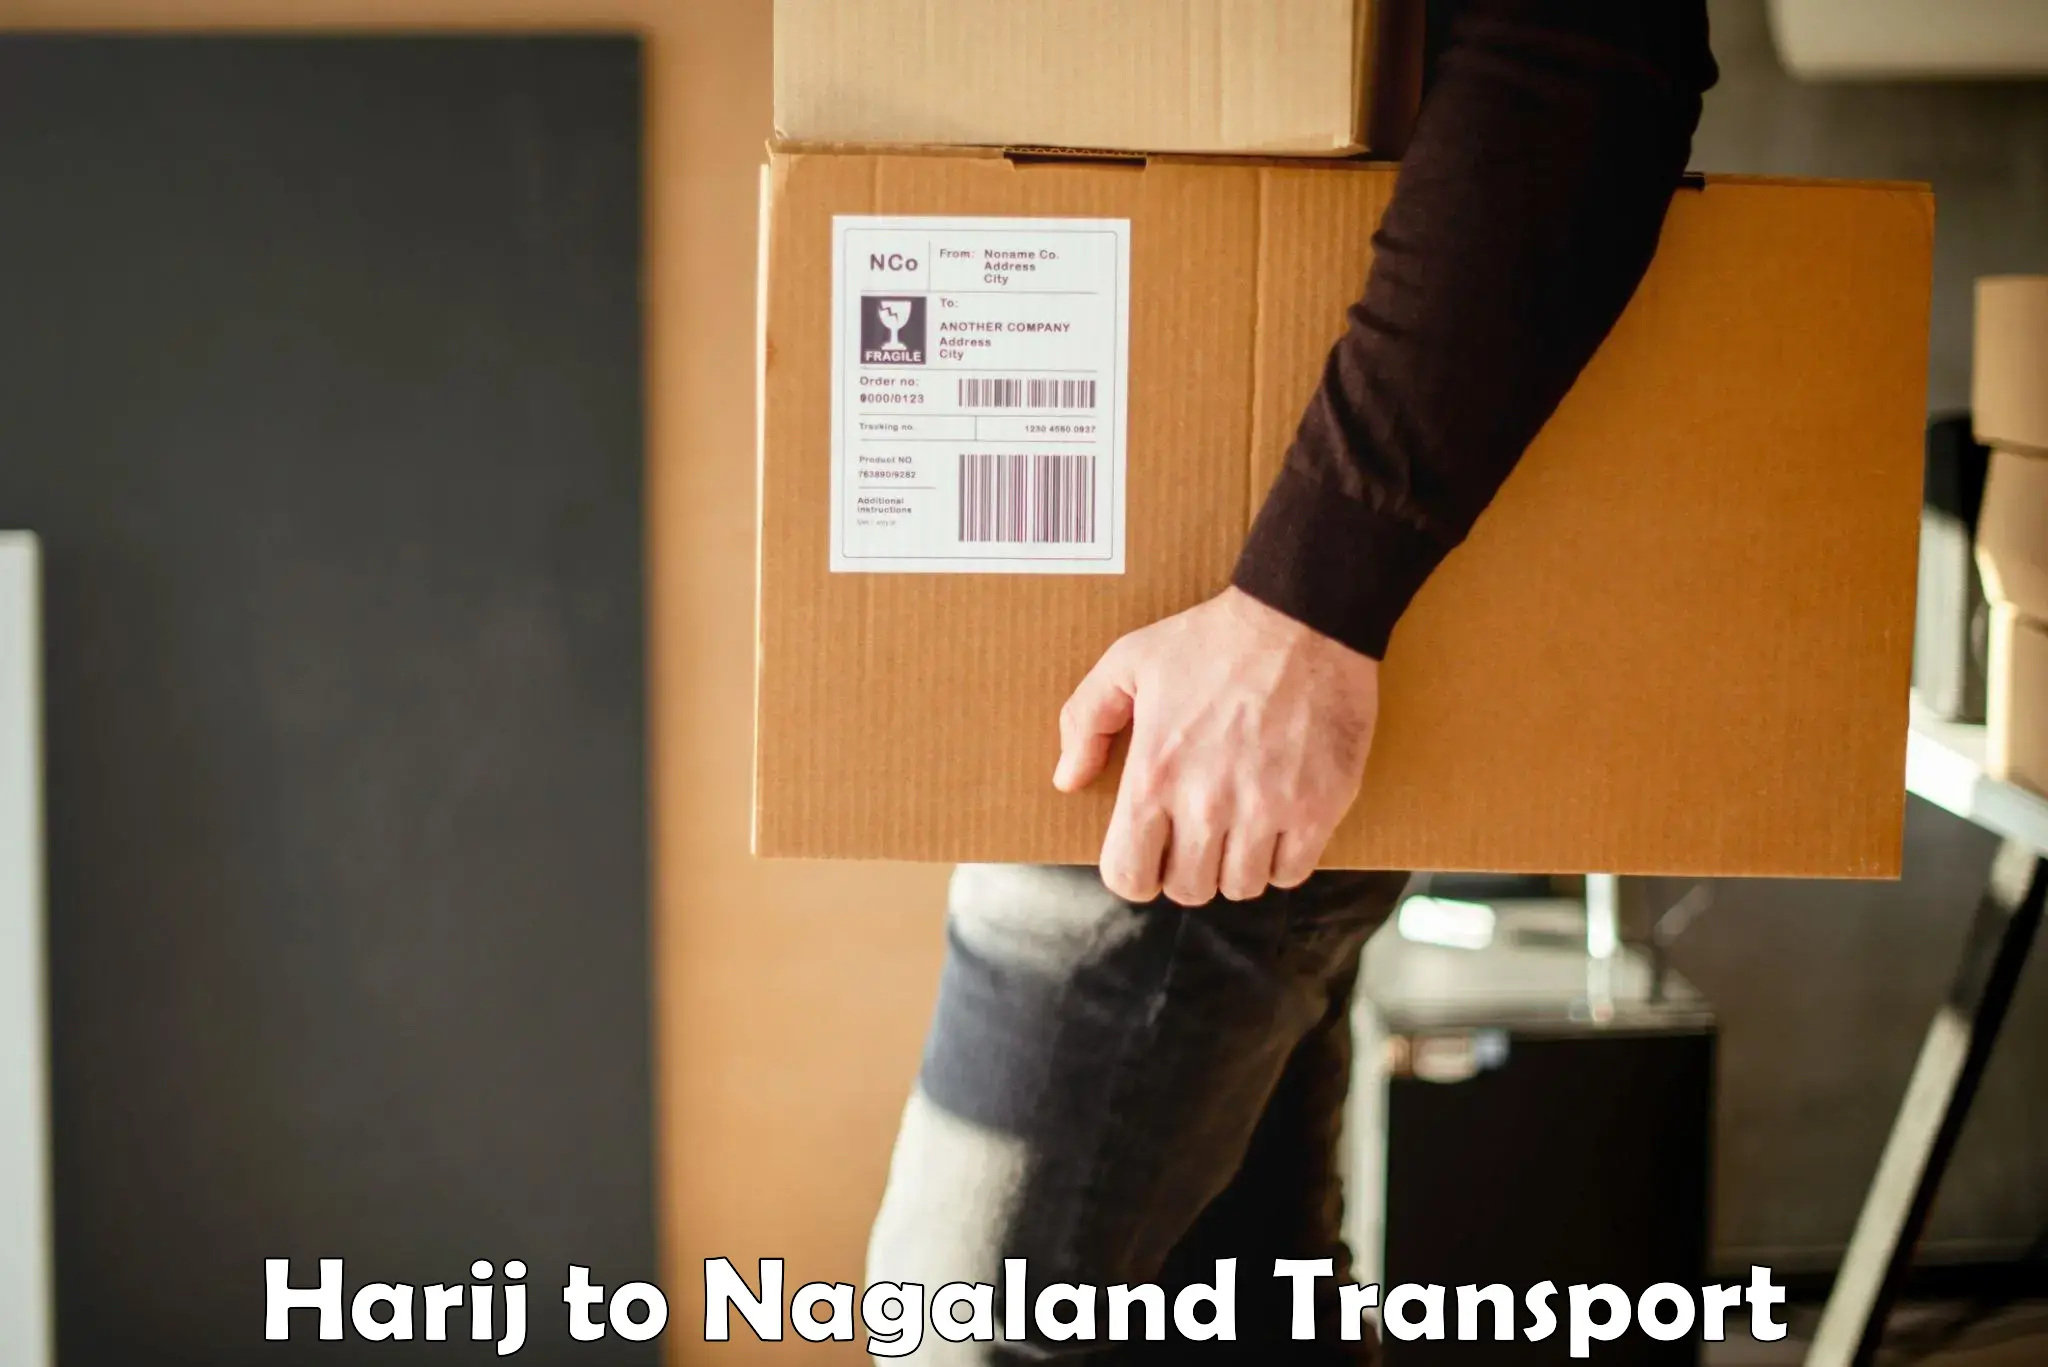 Truck transport companies in India Harij to Nagaland